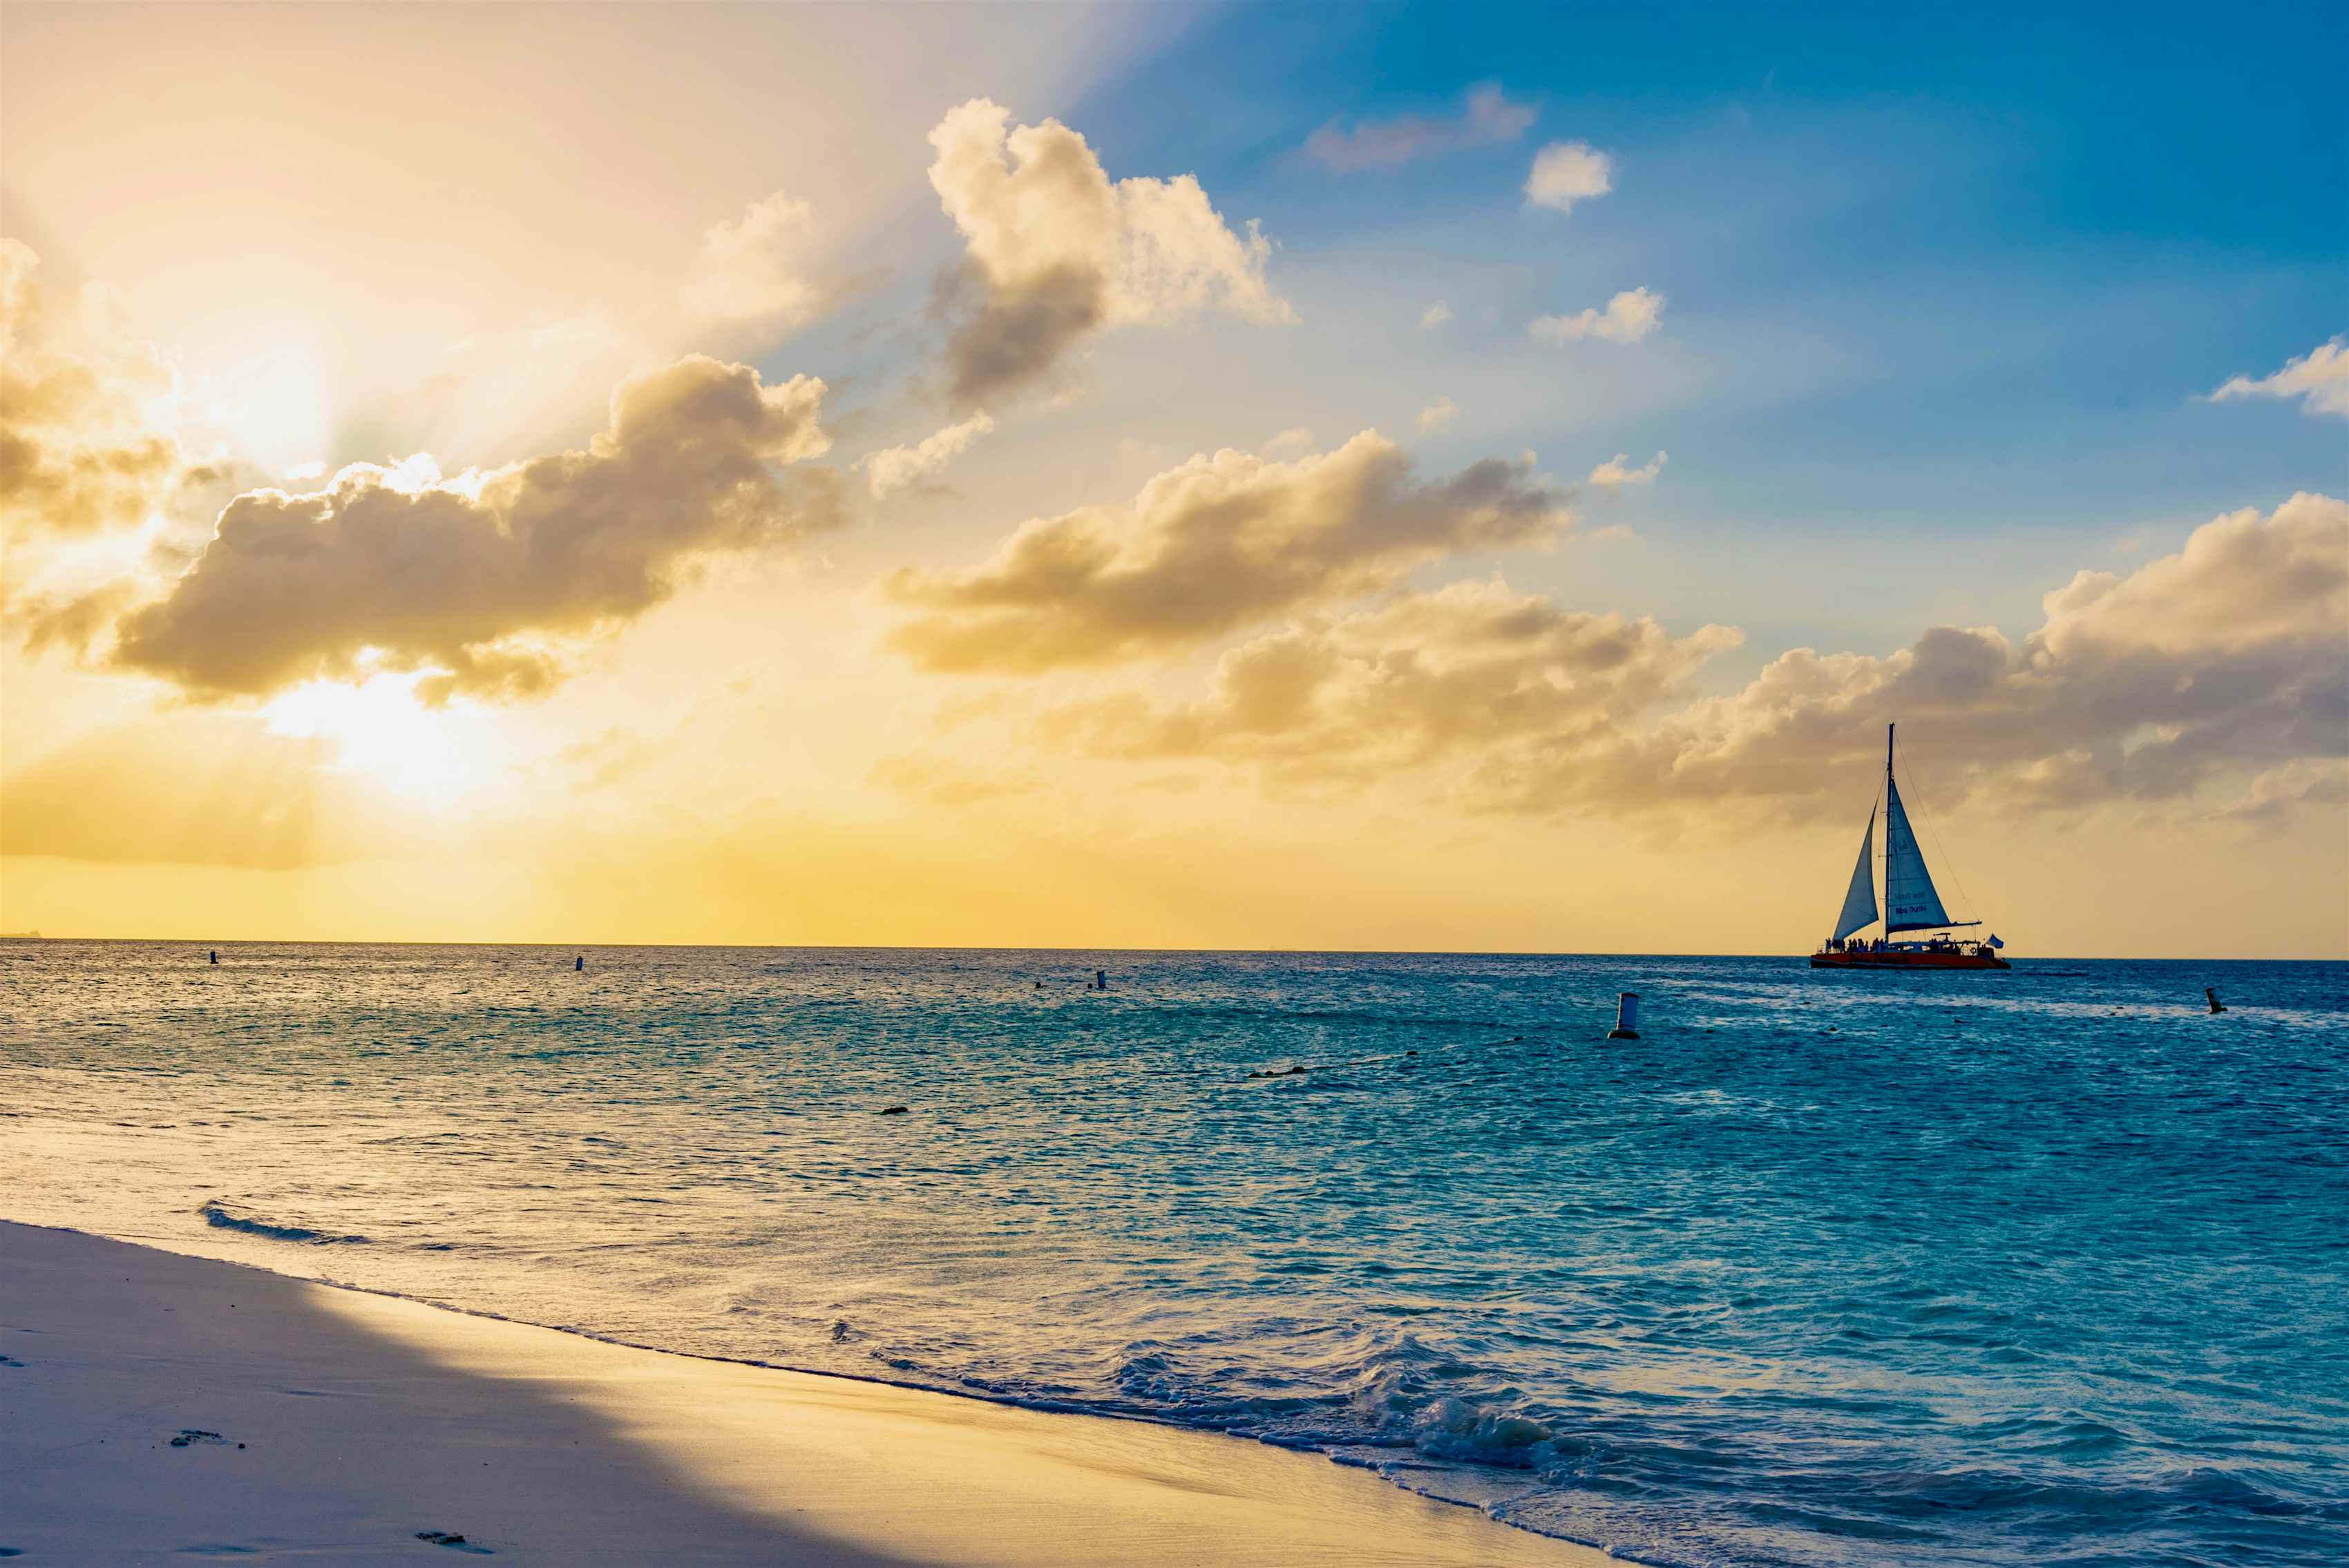 least expensive time to visit aruba